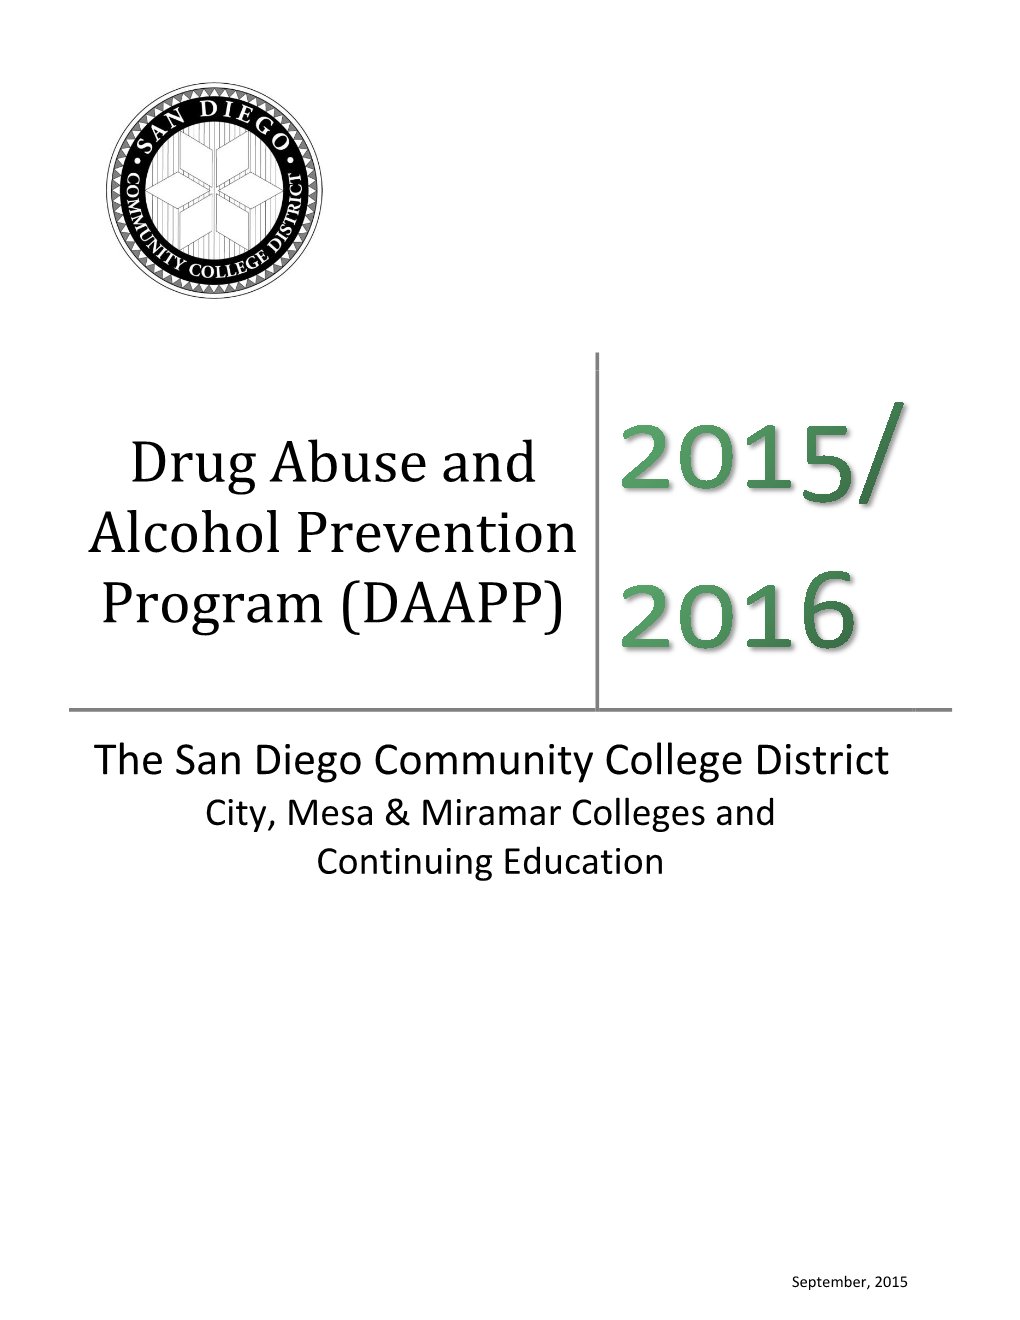 Drug Abuse and Alcohol Prevention Program (DAAPP)